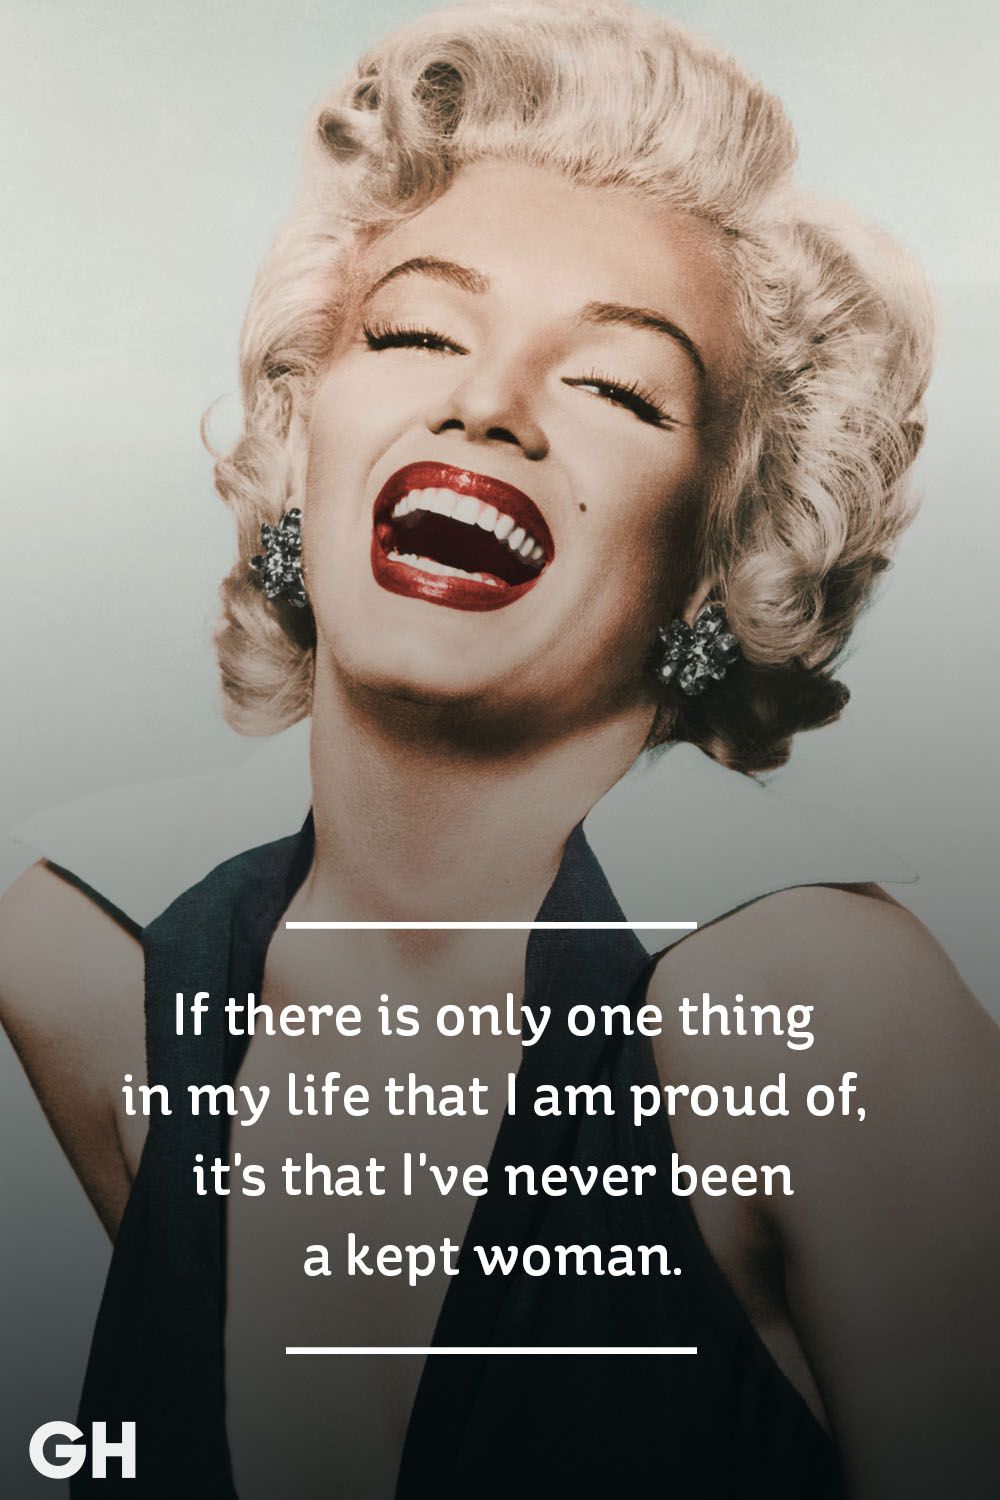 marilyn monroe quotes and sayings about beauty